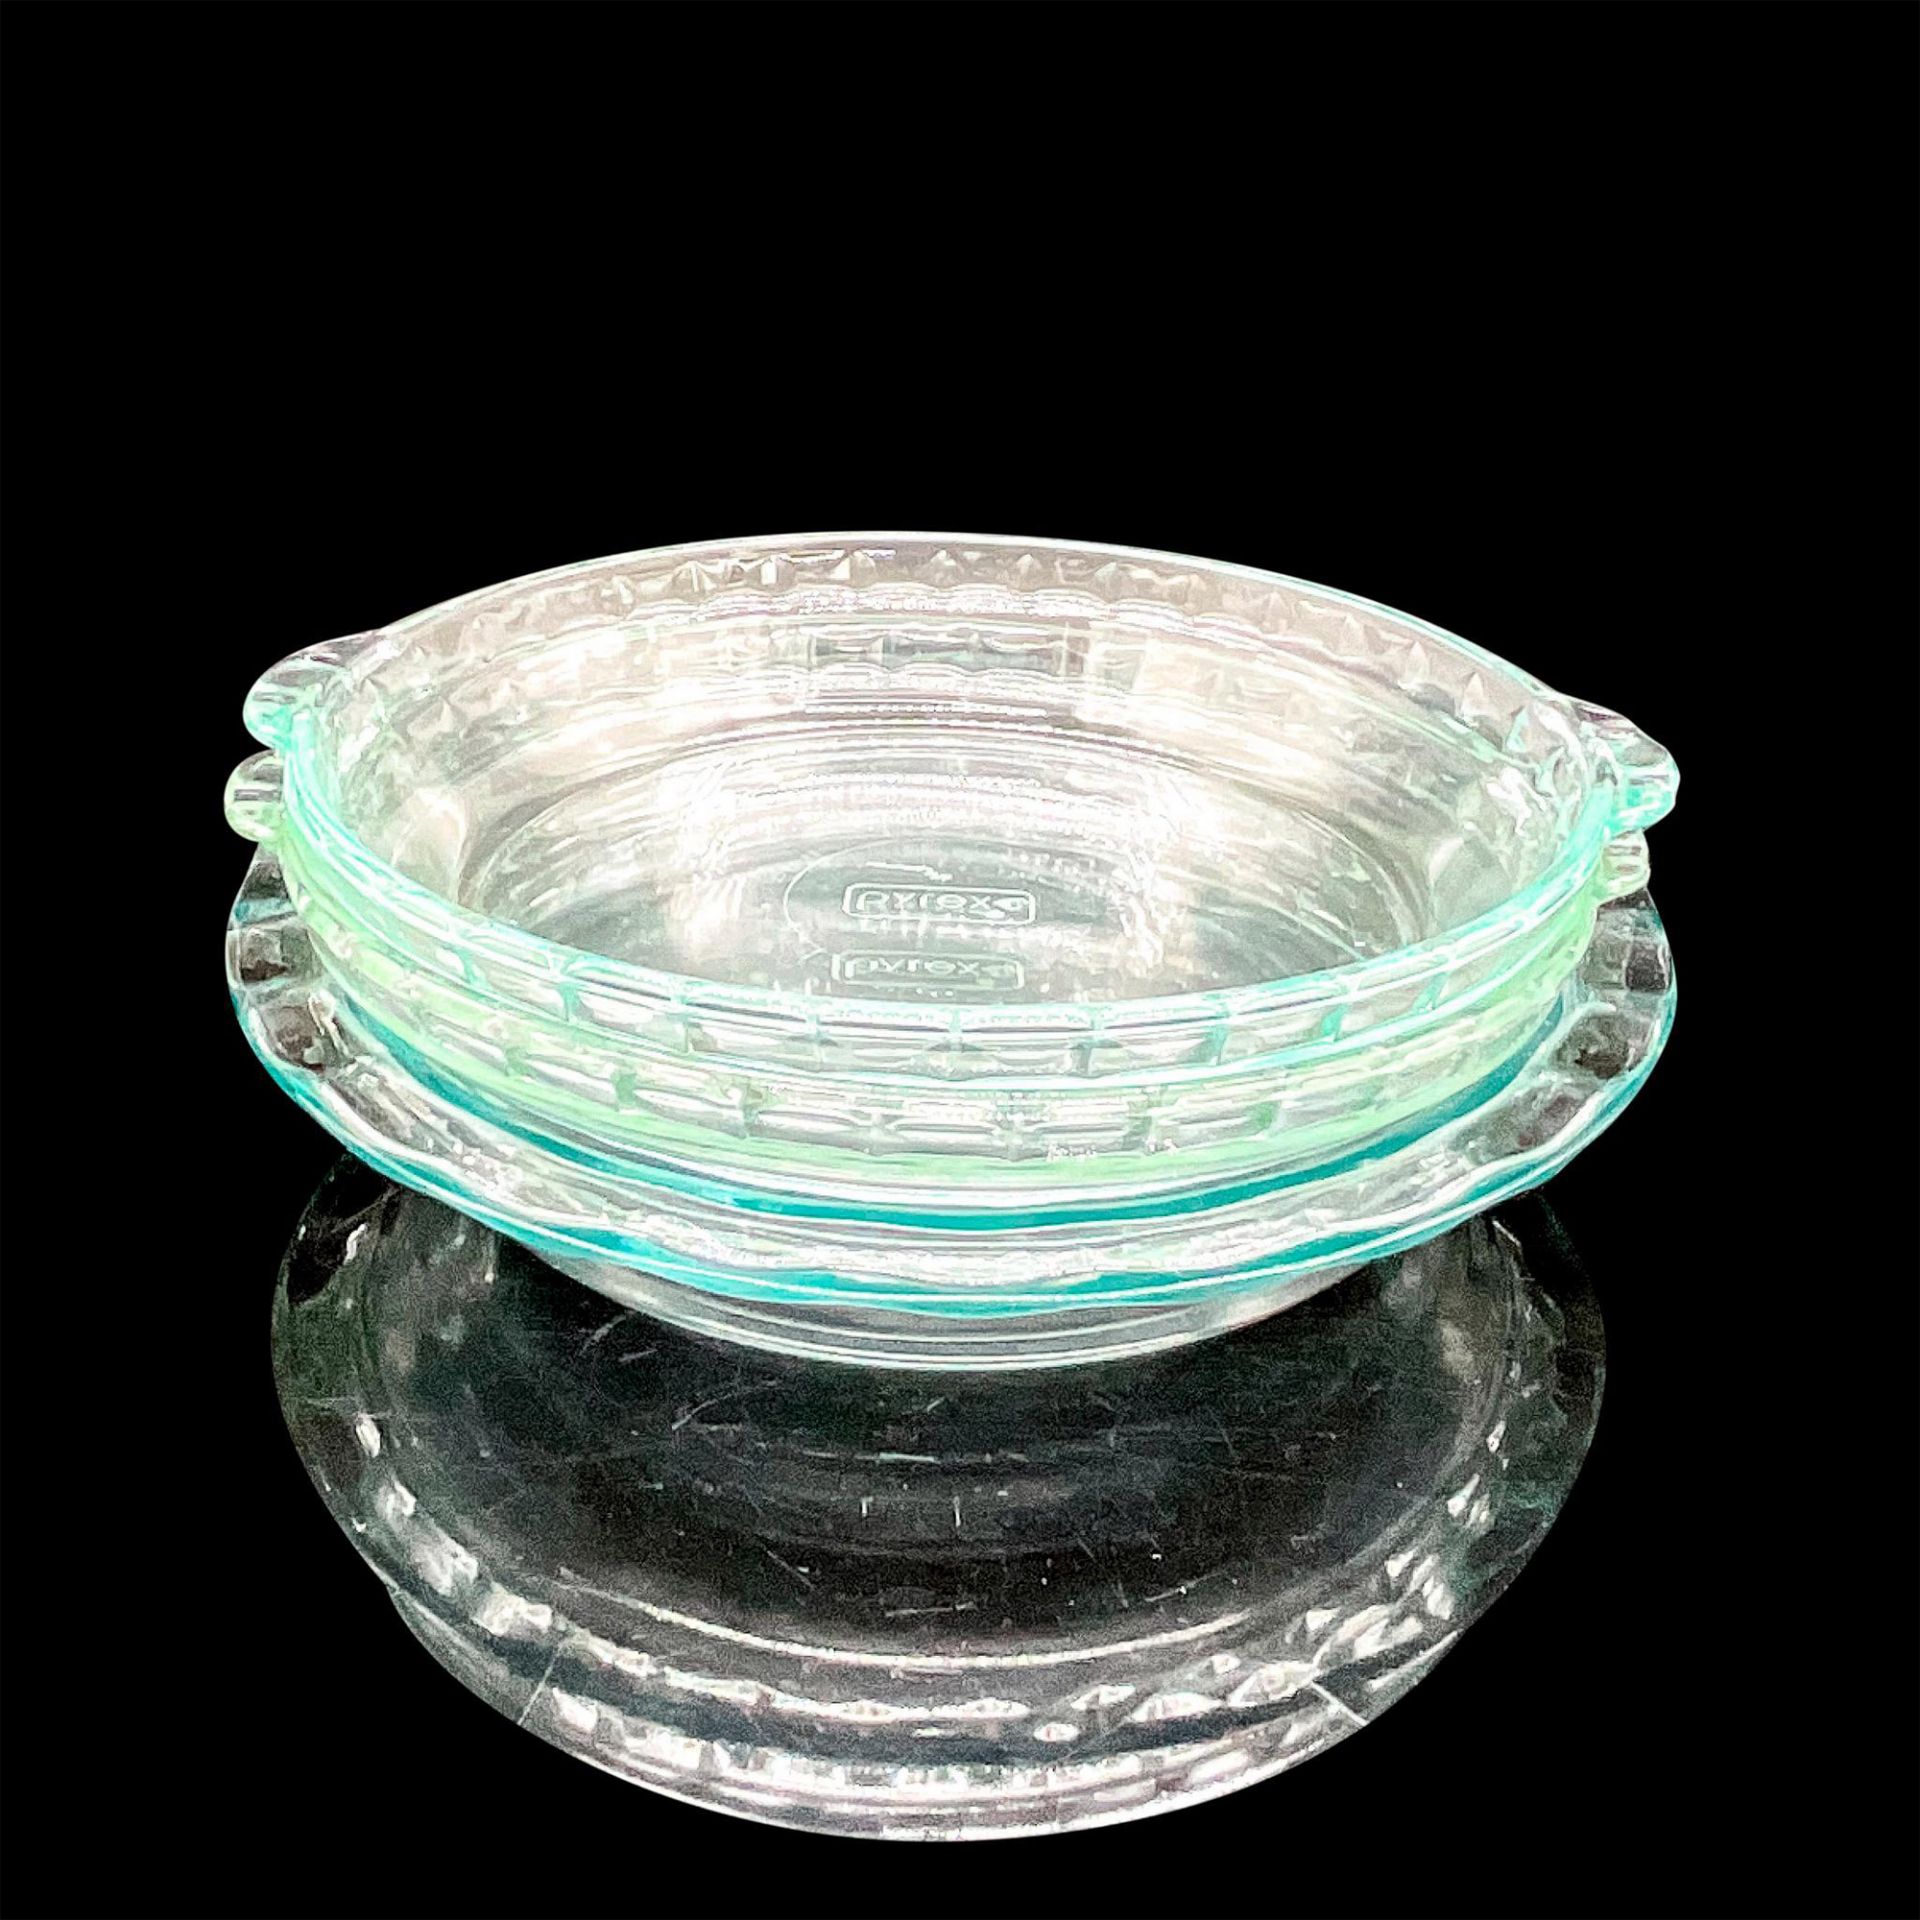 3pc Pyrex Glass Bakeware Glass Dishes